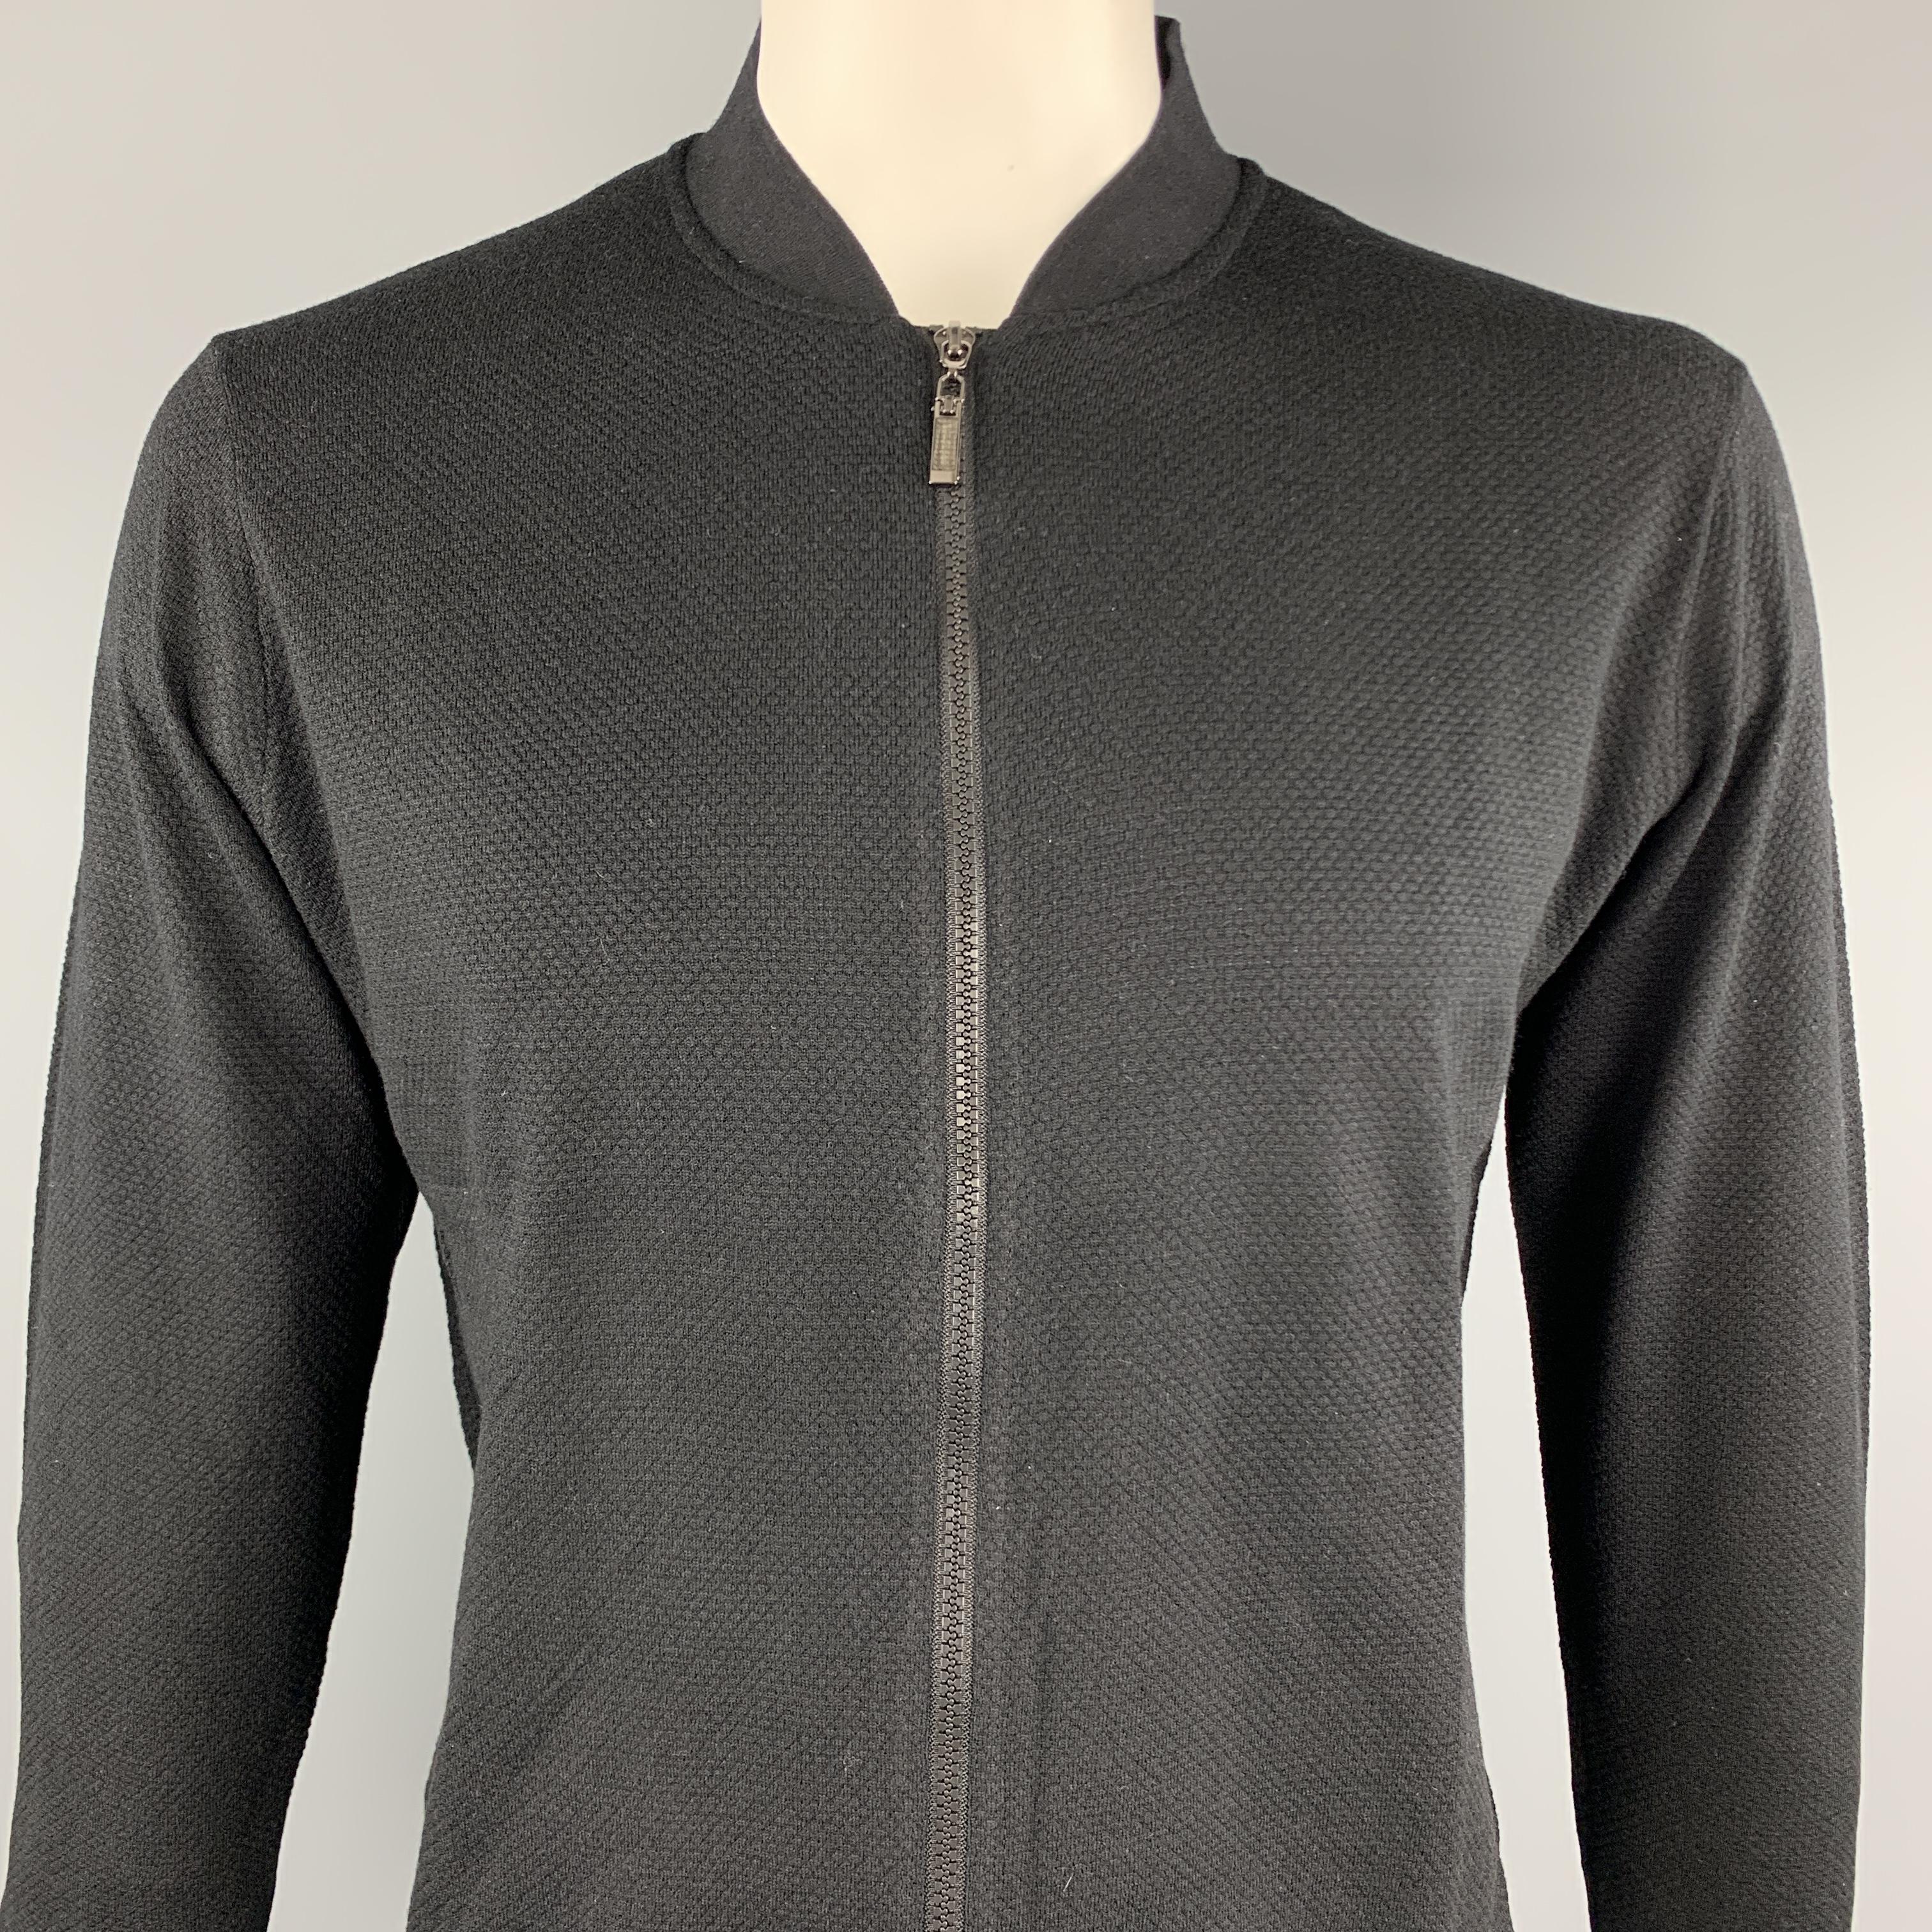 KITON cardigan sweater comes in a solid textured cashmere / silk material, with a ribbed collar, cuffs and hem, zip up. Made in Italy. 

New With Tags. 
Marked: IT 52 / US L

Measurements:

Shoulder: 18.5 in. 
Chest: 44 in. 
Sleeve: 24.5 in.